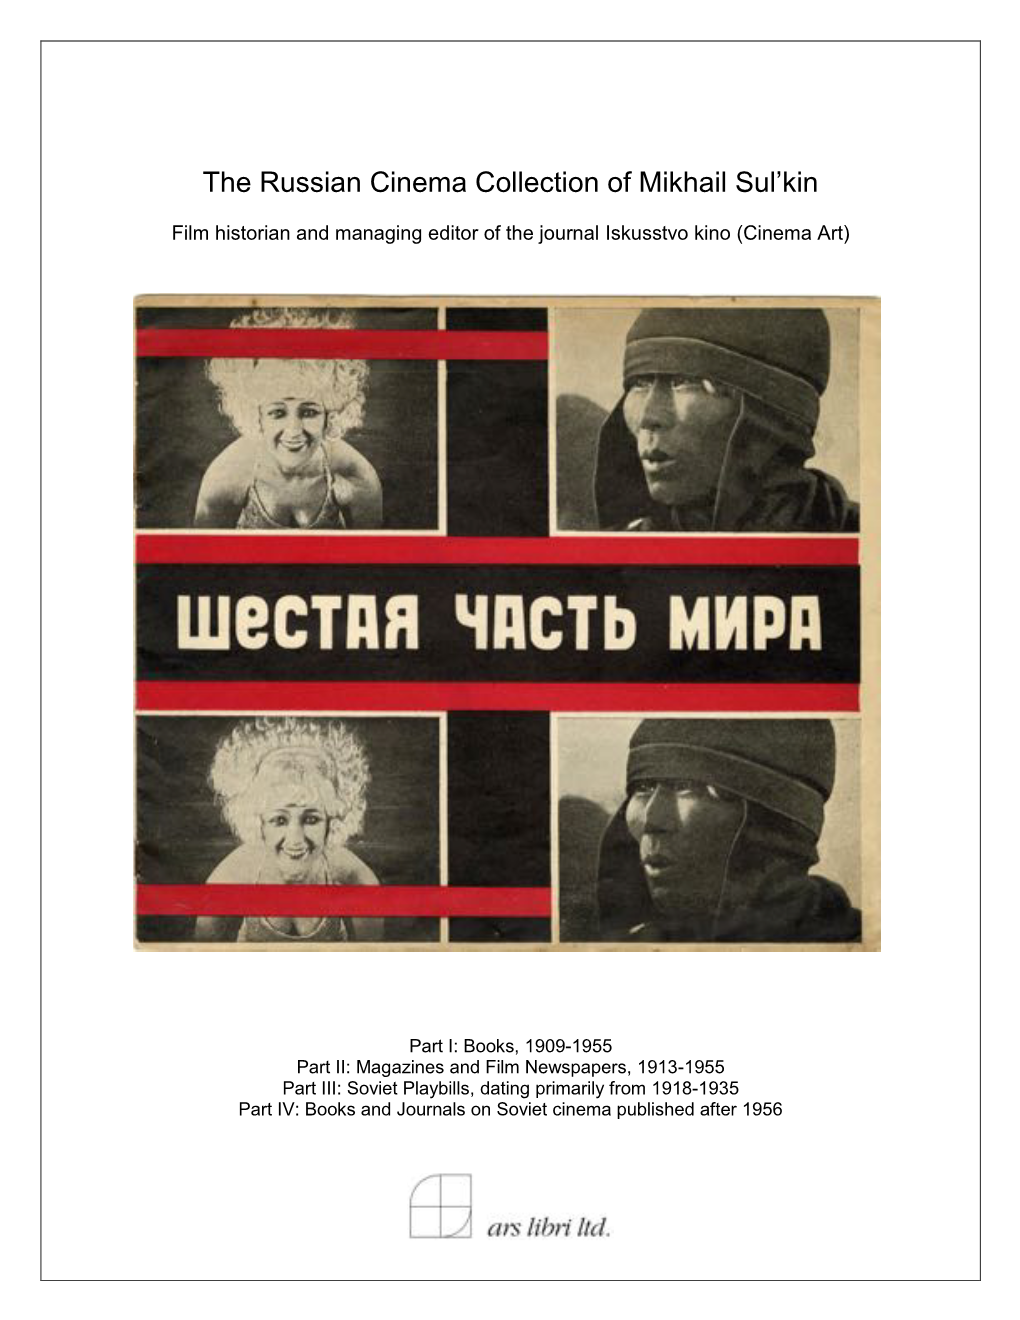 The Russian Cinema Collection of Mikhail Sul'kin, Film